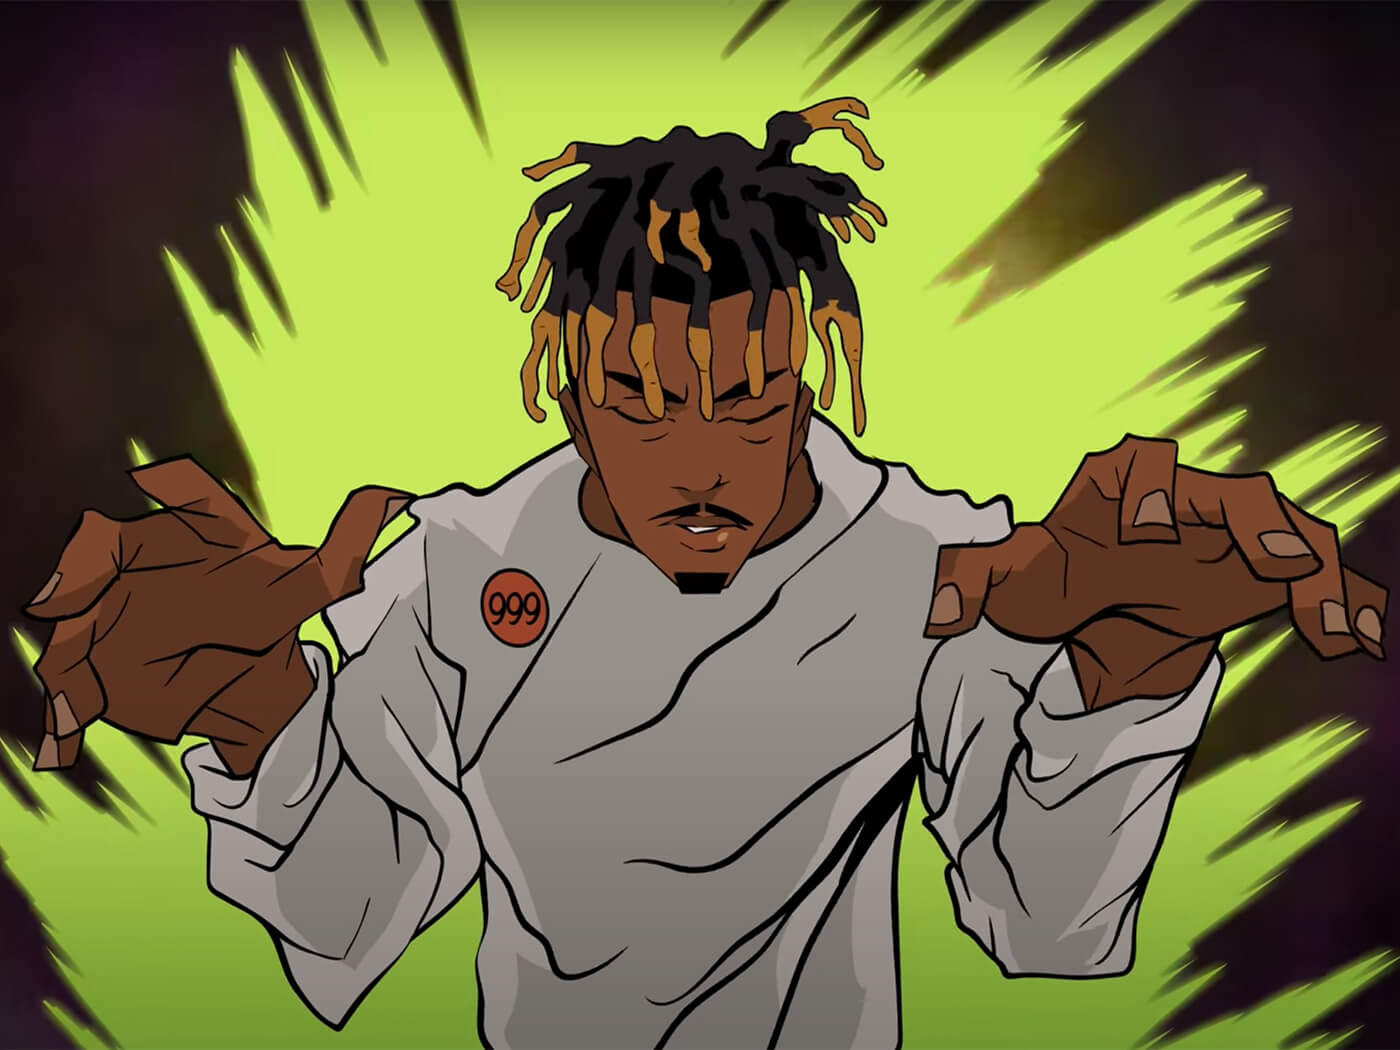 Listen to a new posthumous Juice WRLD track Righteous labfm